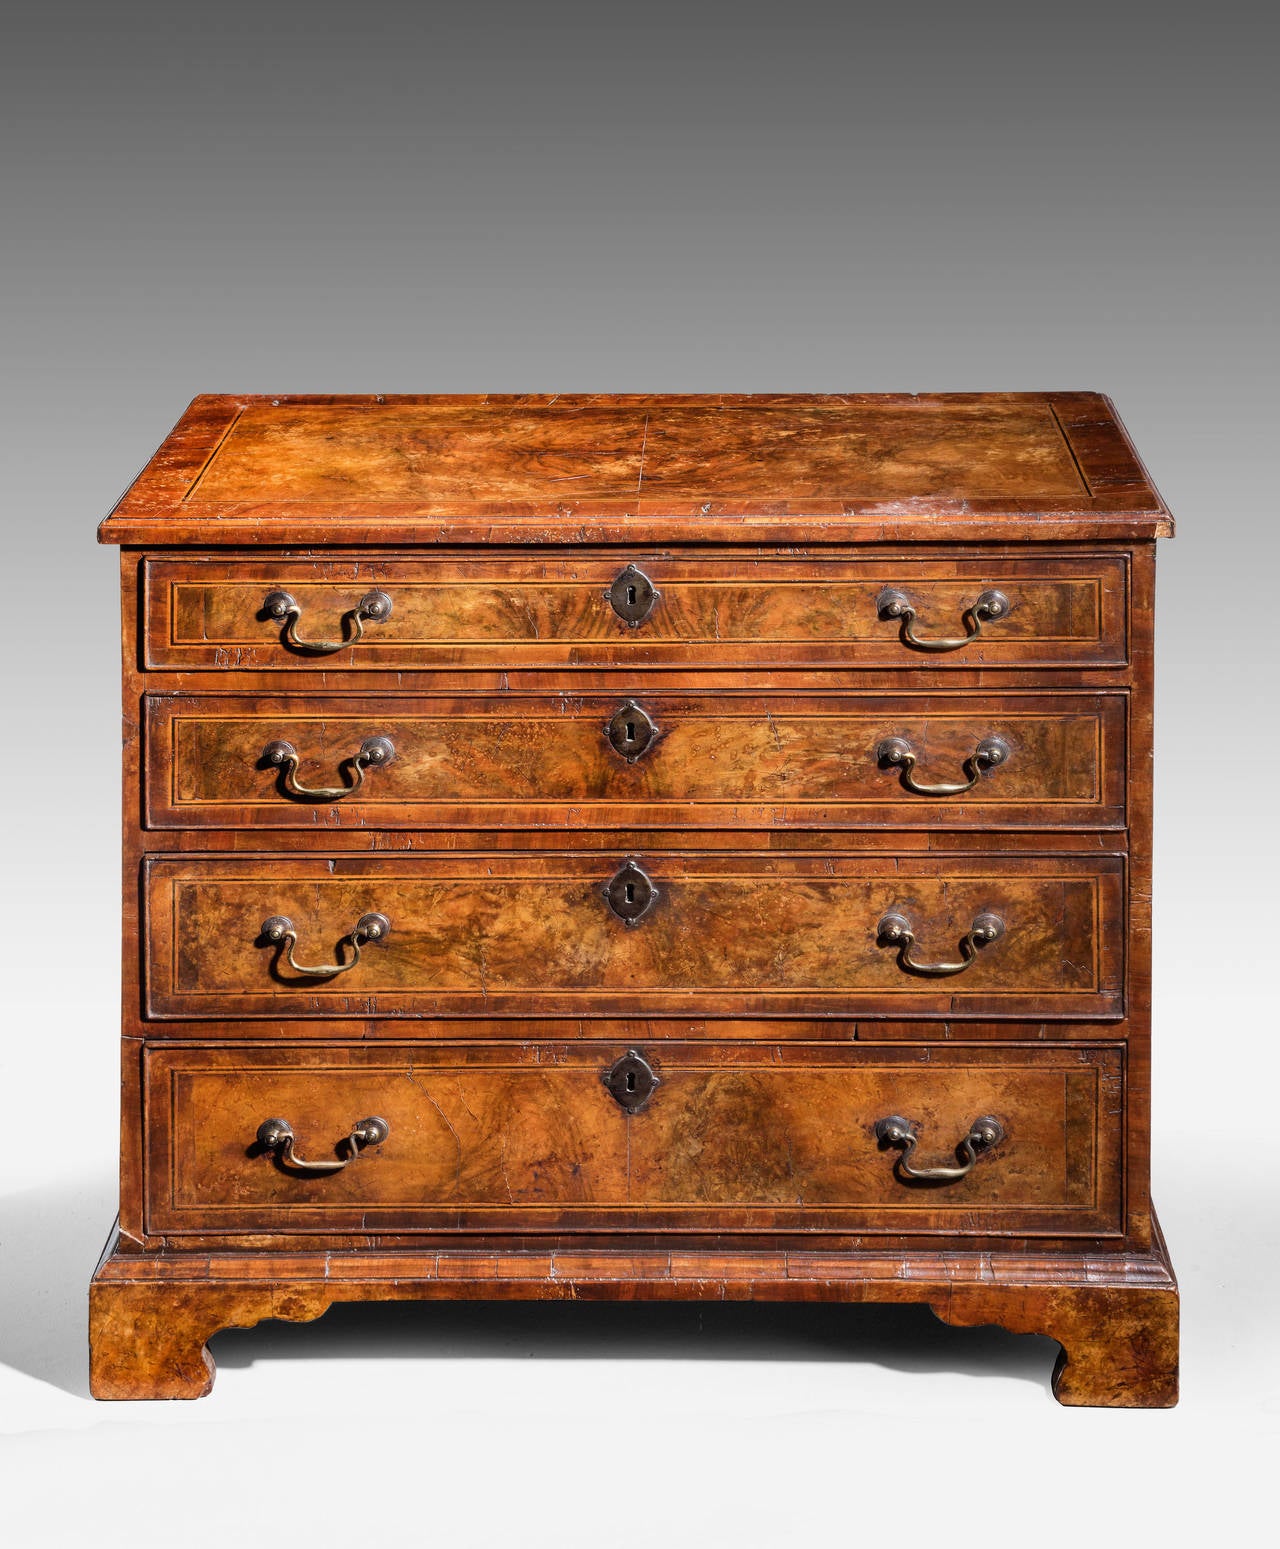 A North Country mid-18th century walnut chest of drawers, with highly figured timbers. Crossbanded and ebony and box wood lined inlay. Good period swan neck handles.